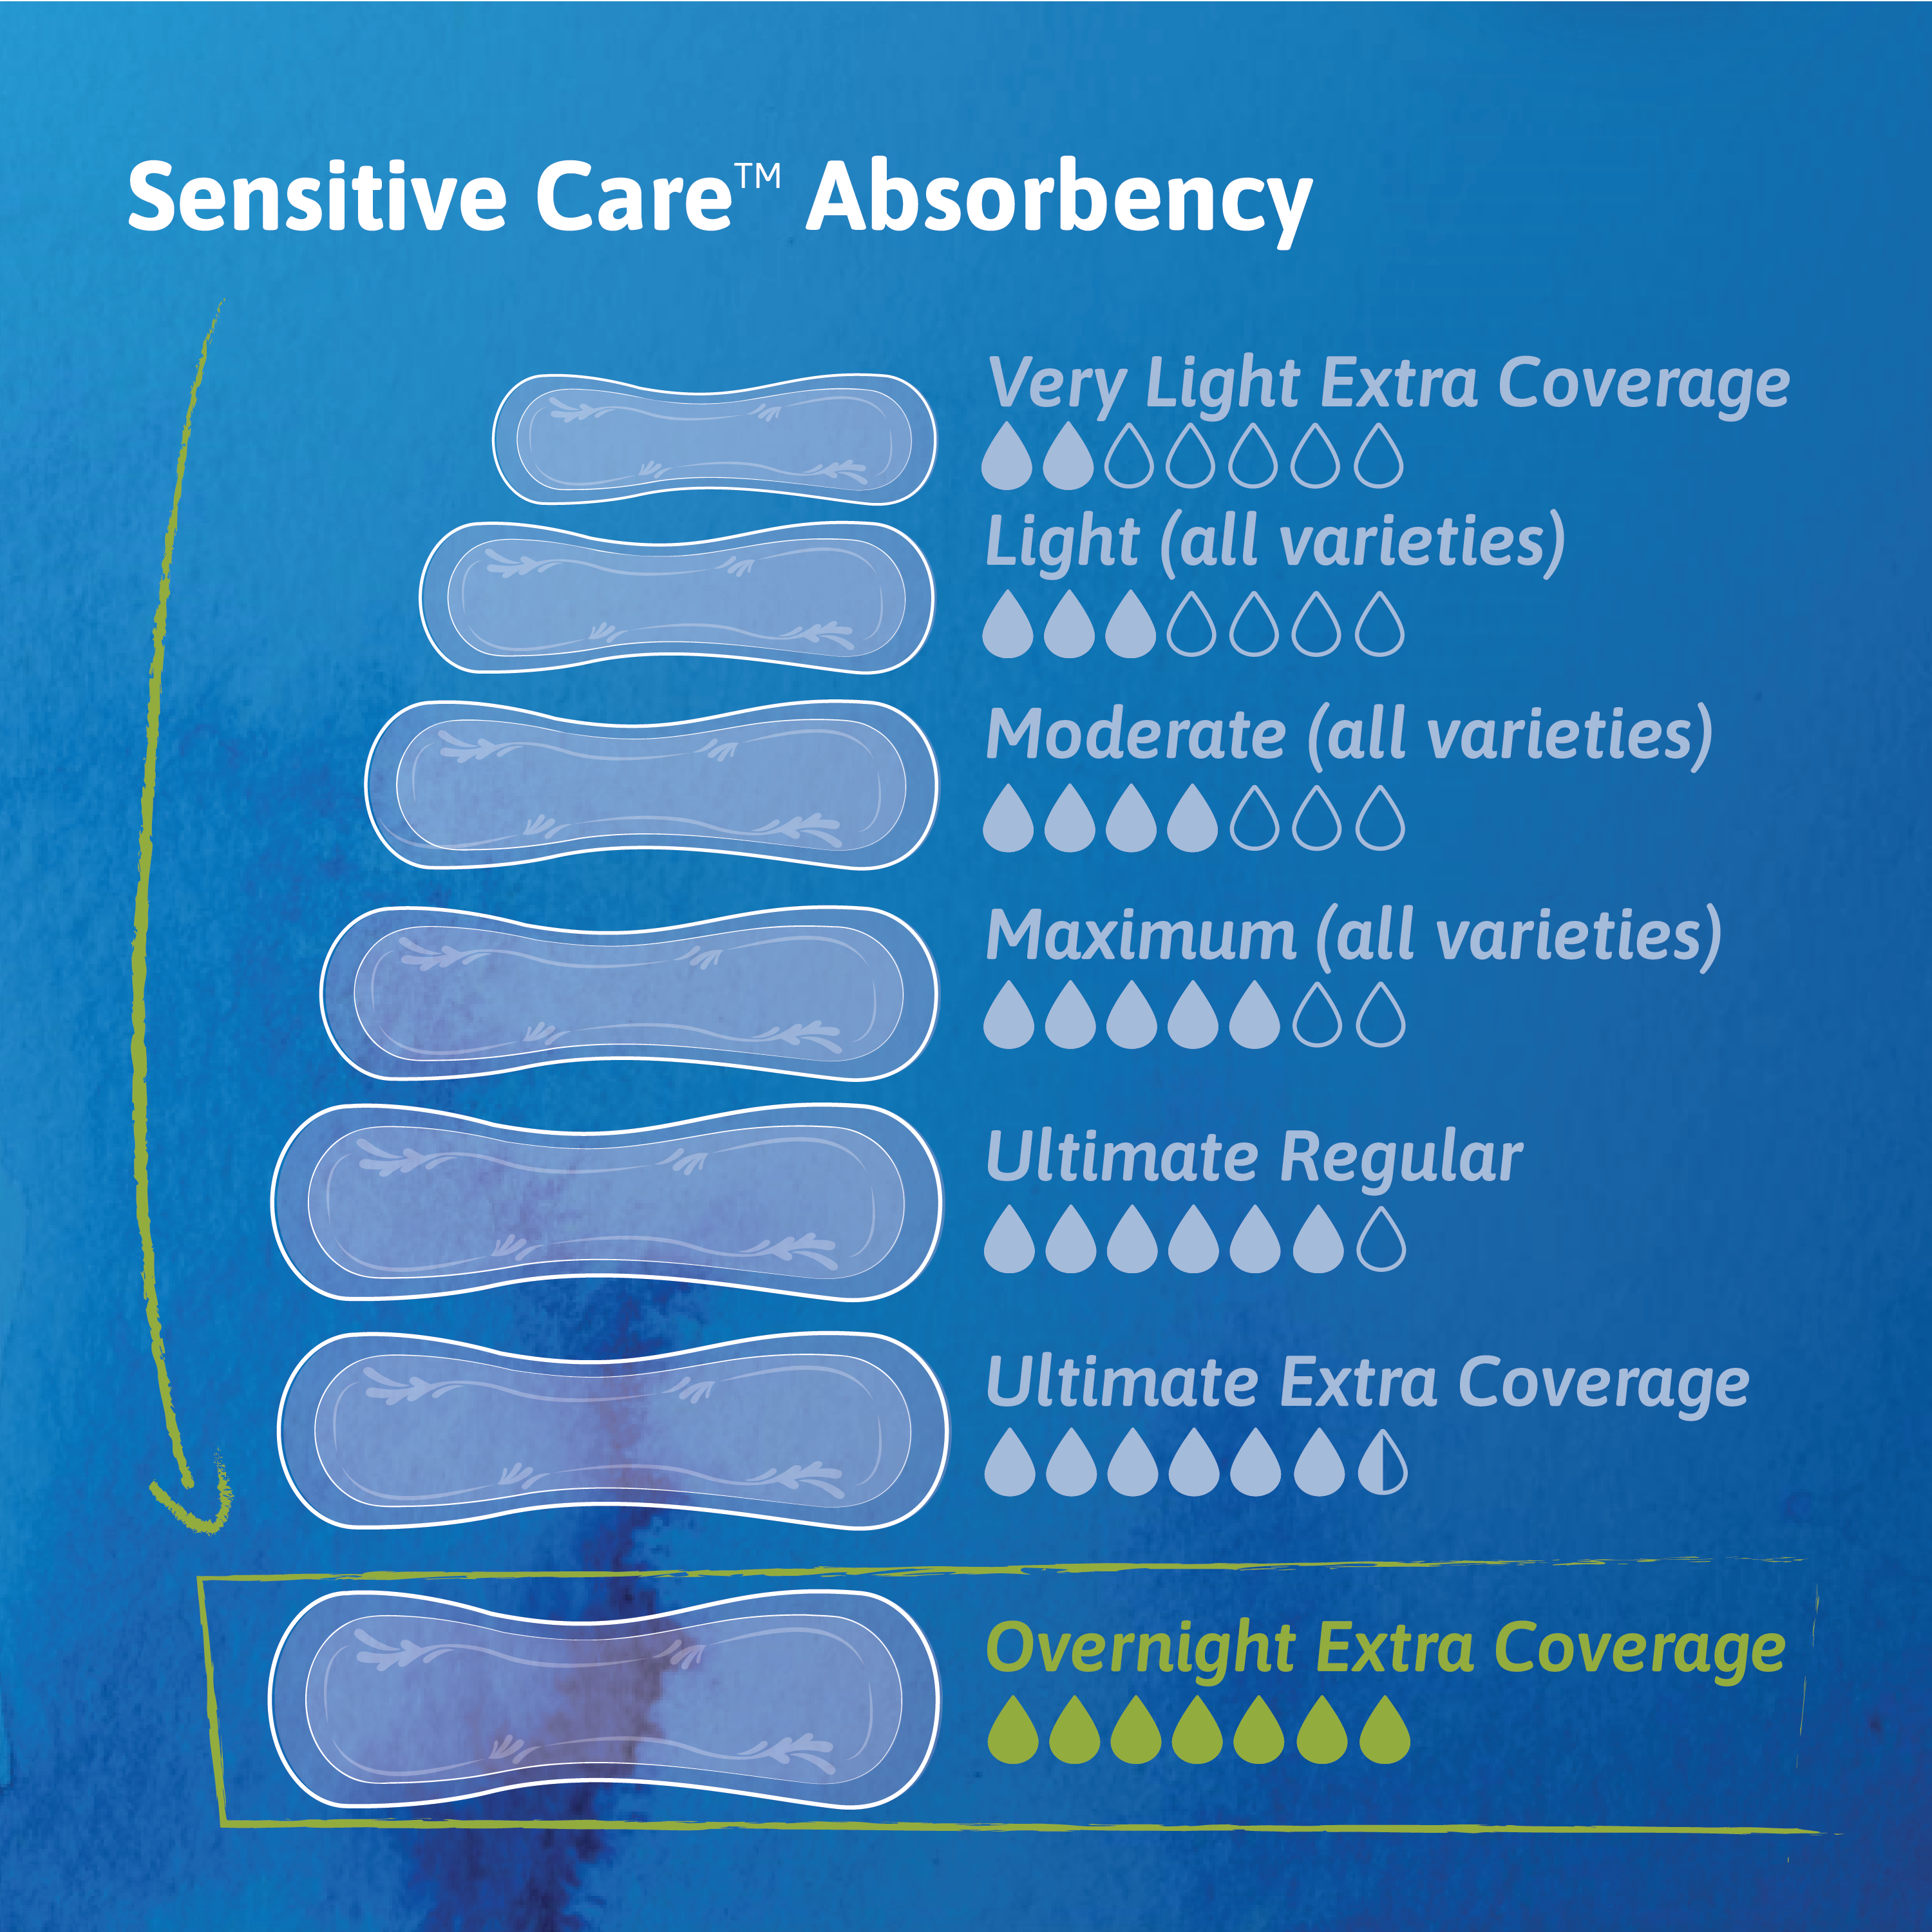 An absorbency chart with overnight extra coverage at the highest level of absorbency